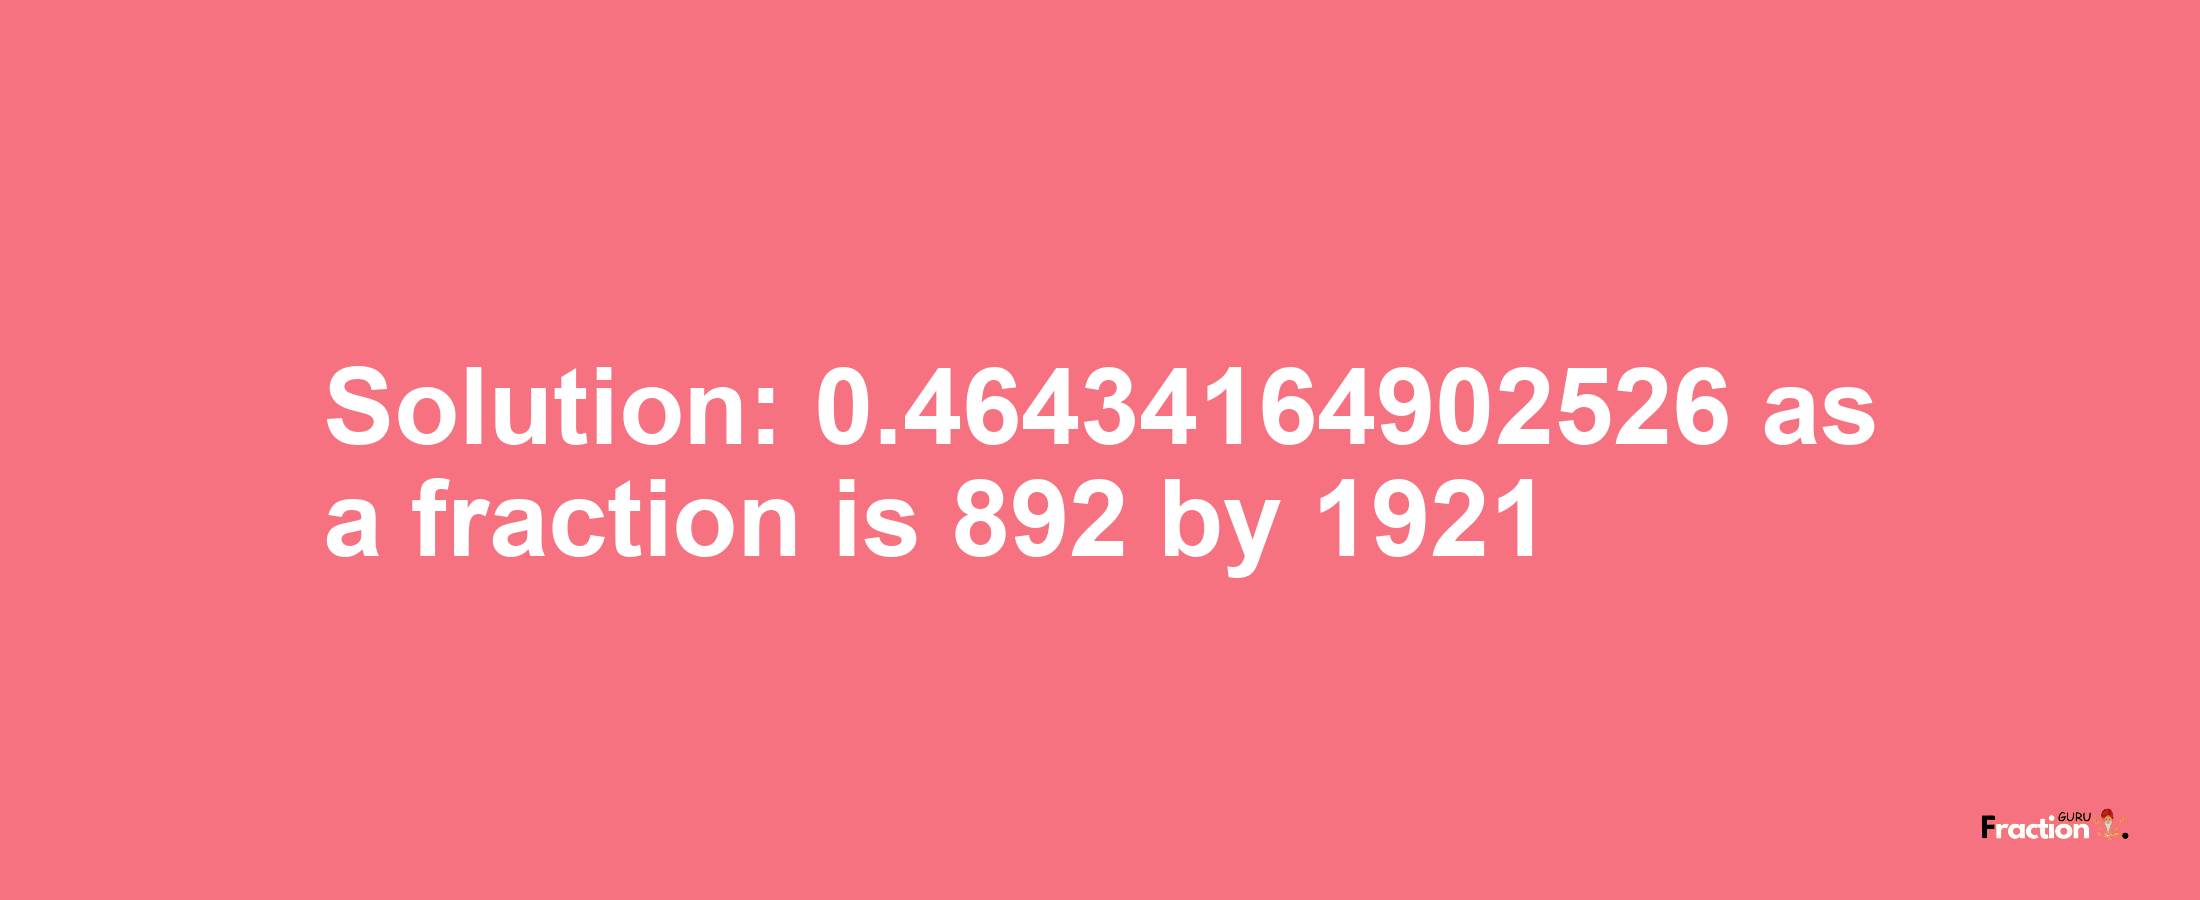 Solution:0.46434164902526 as a fraction is 892/1921